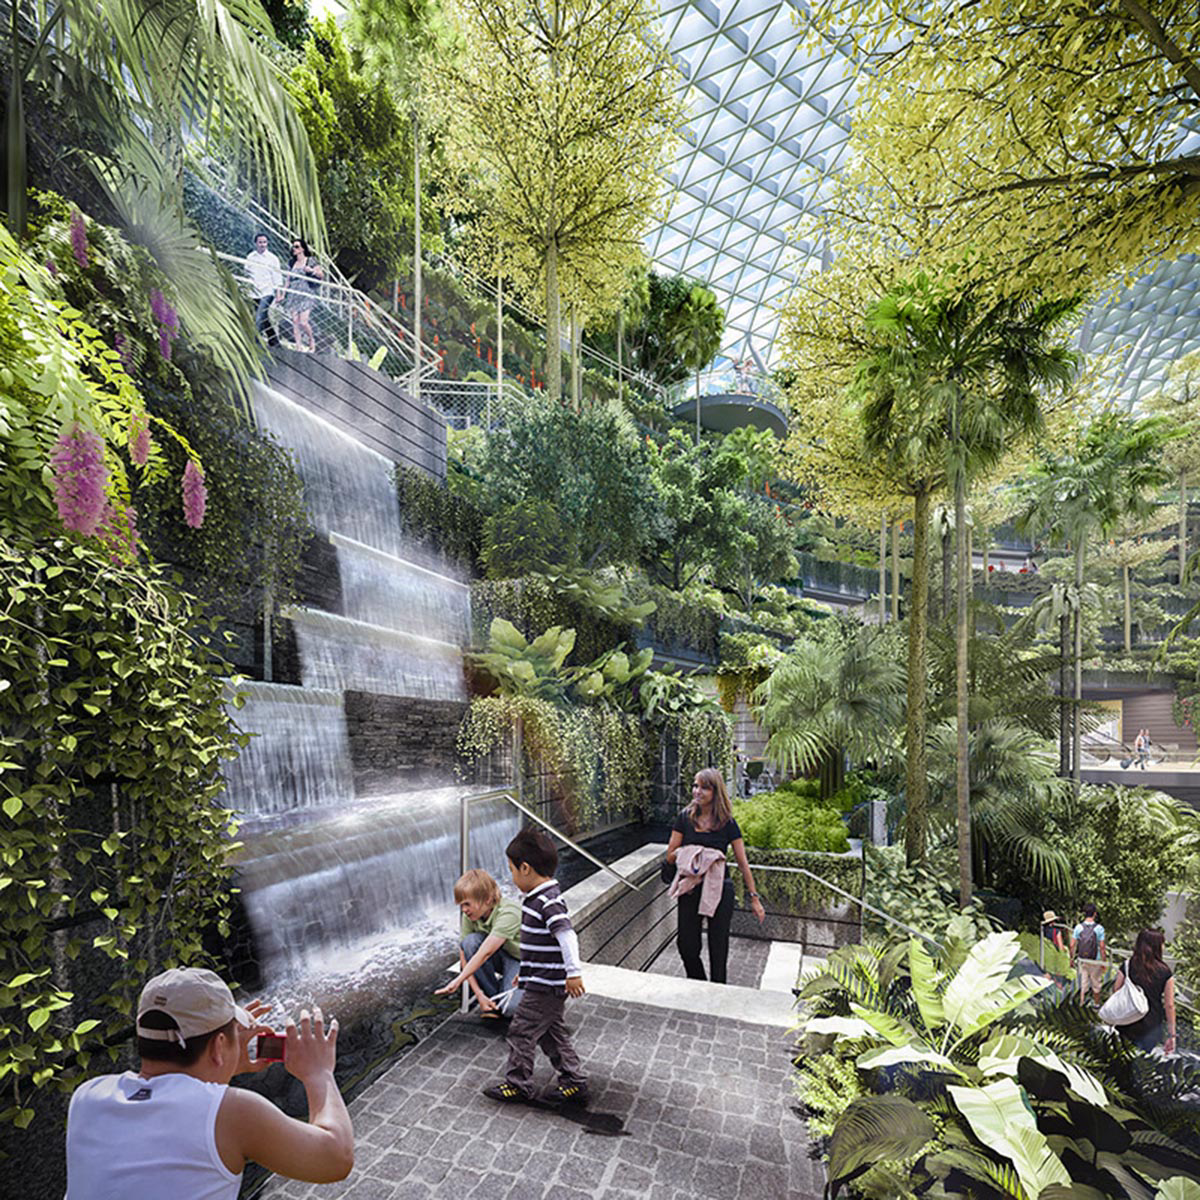 Moshe Safdie Designs Singapore's Jewel Changi Airport As a